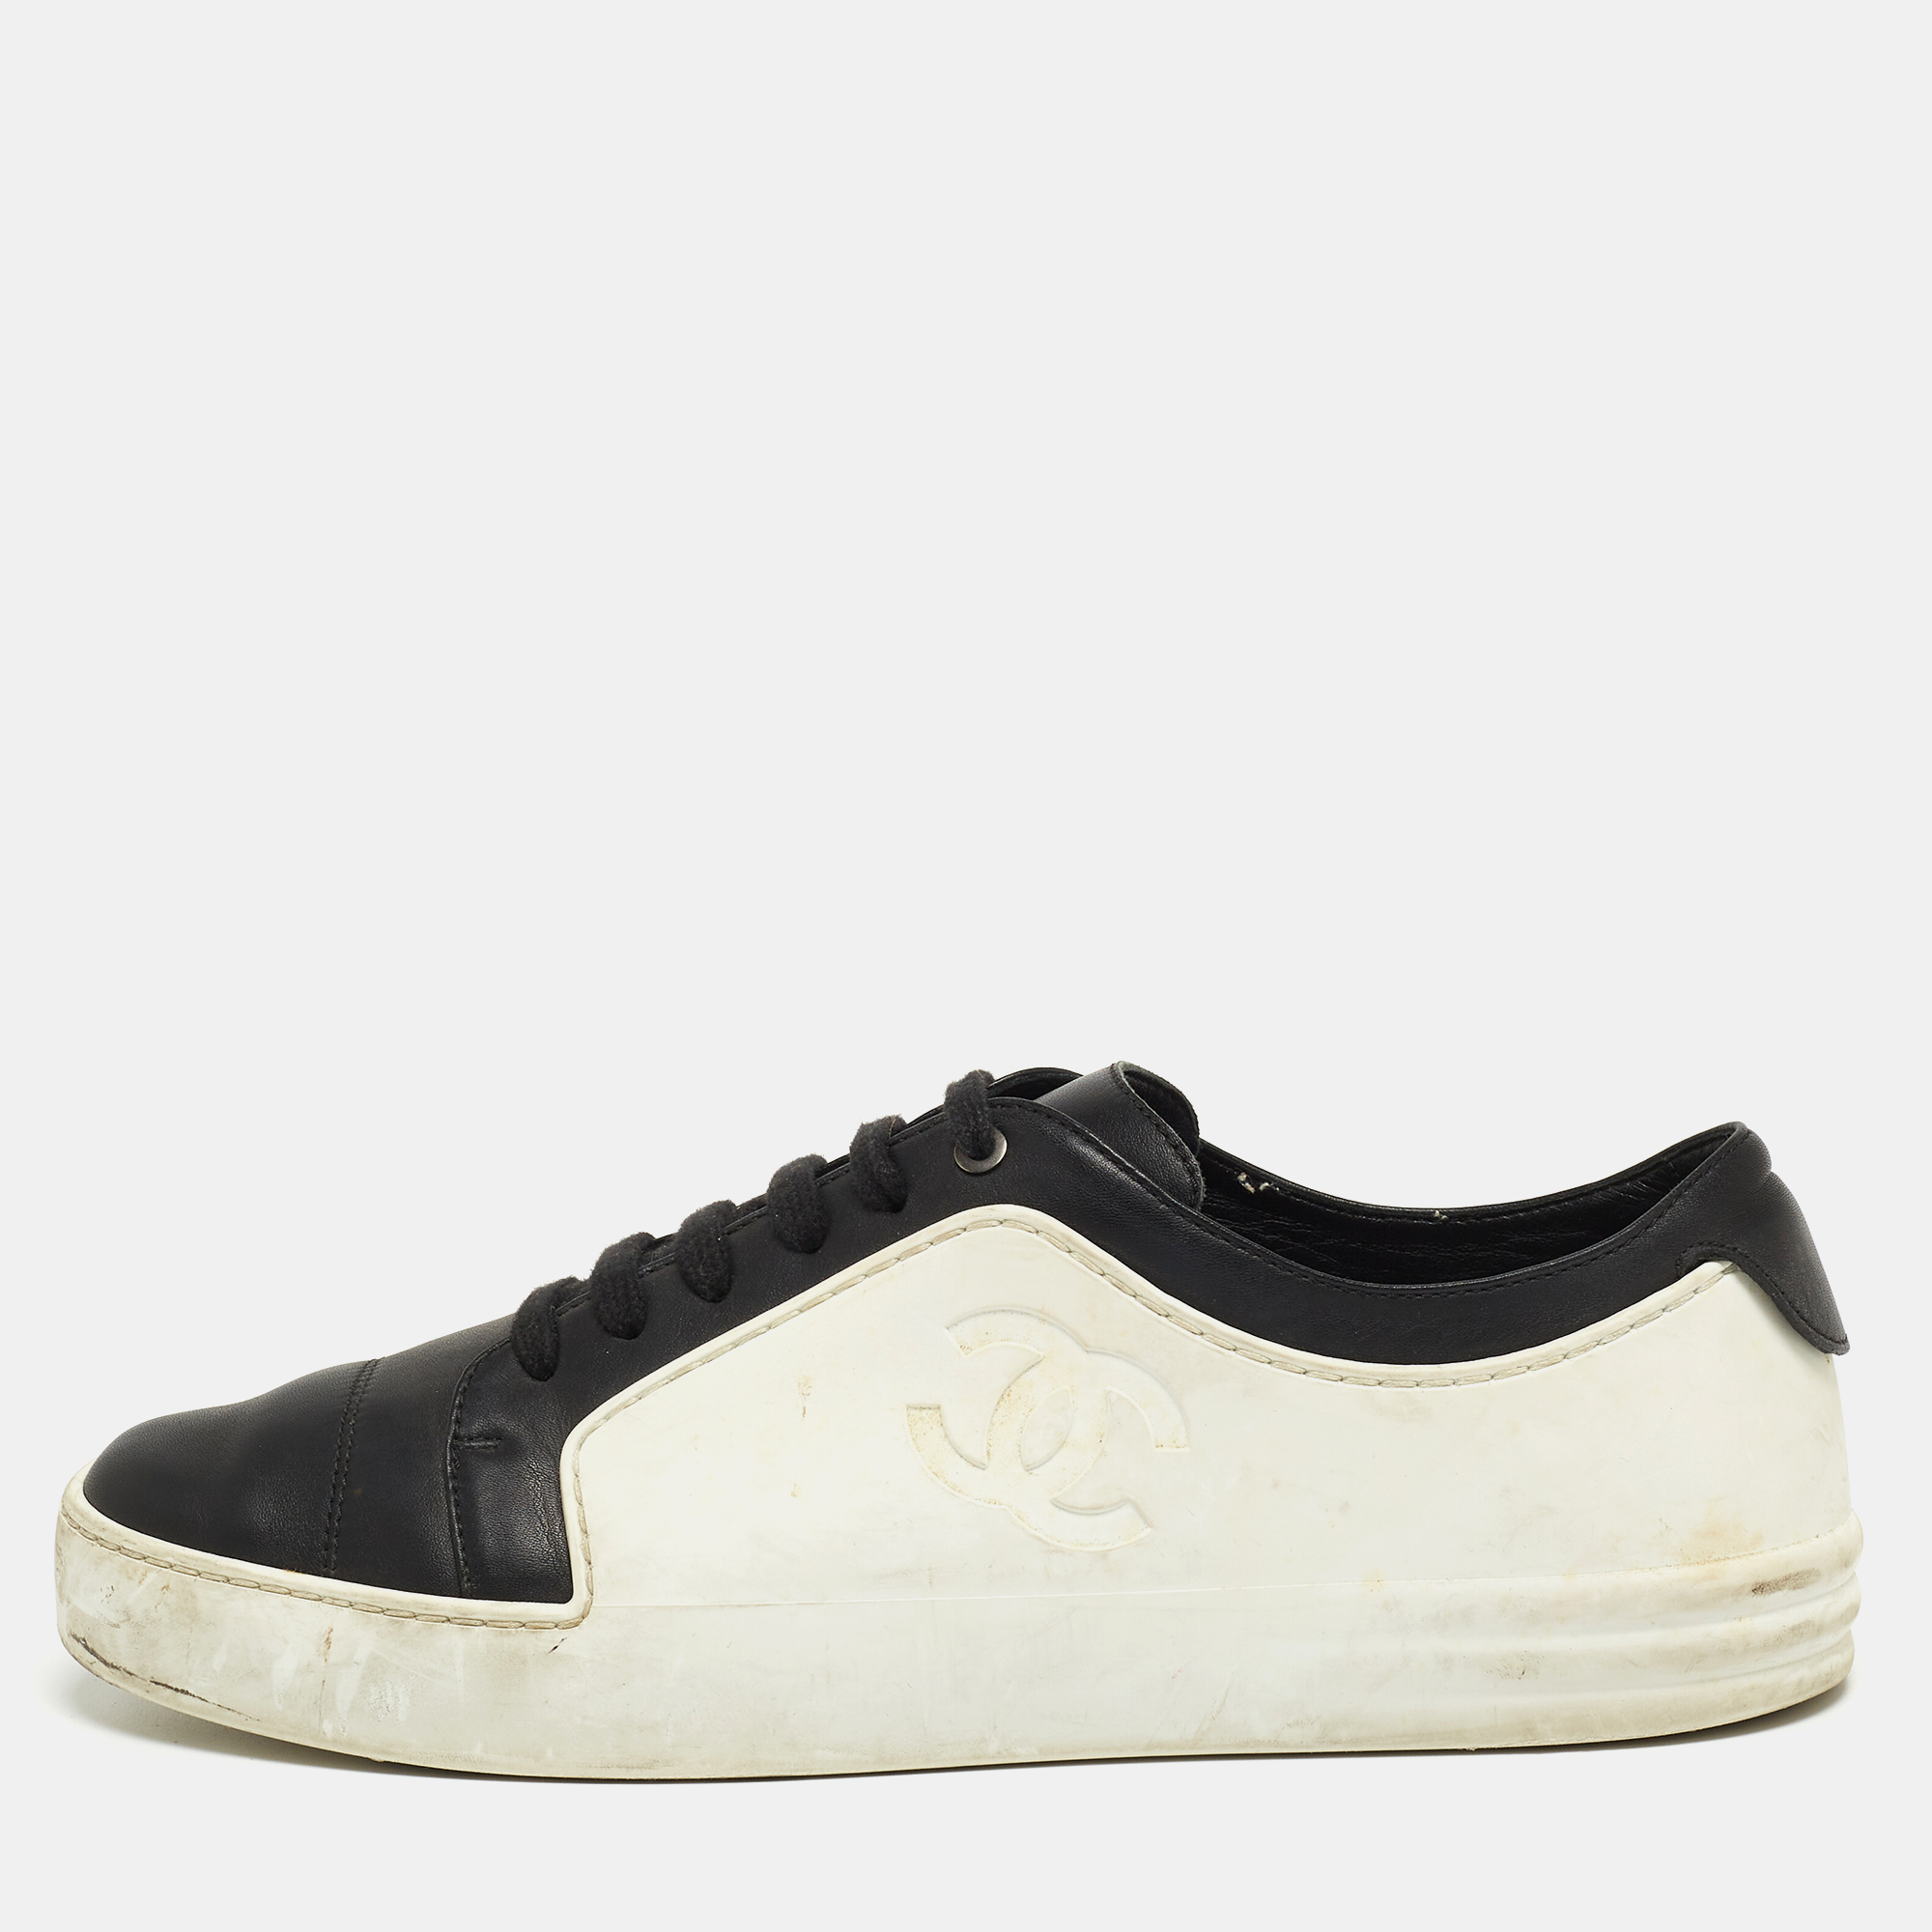 Chanel Chanel cc low top trainer black White